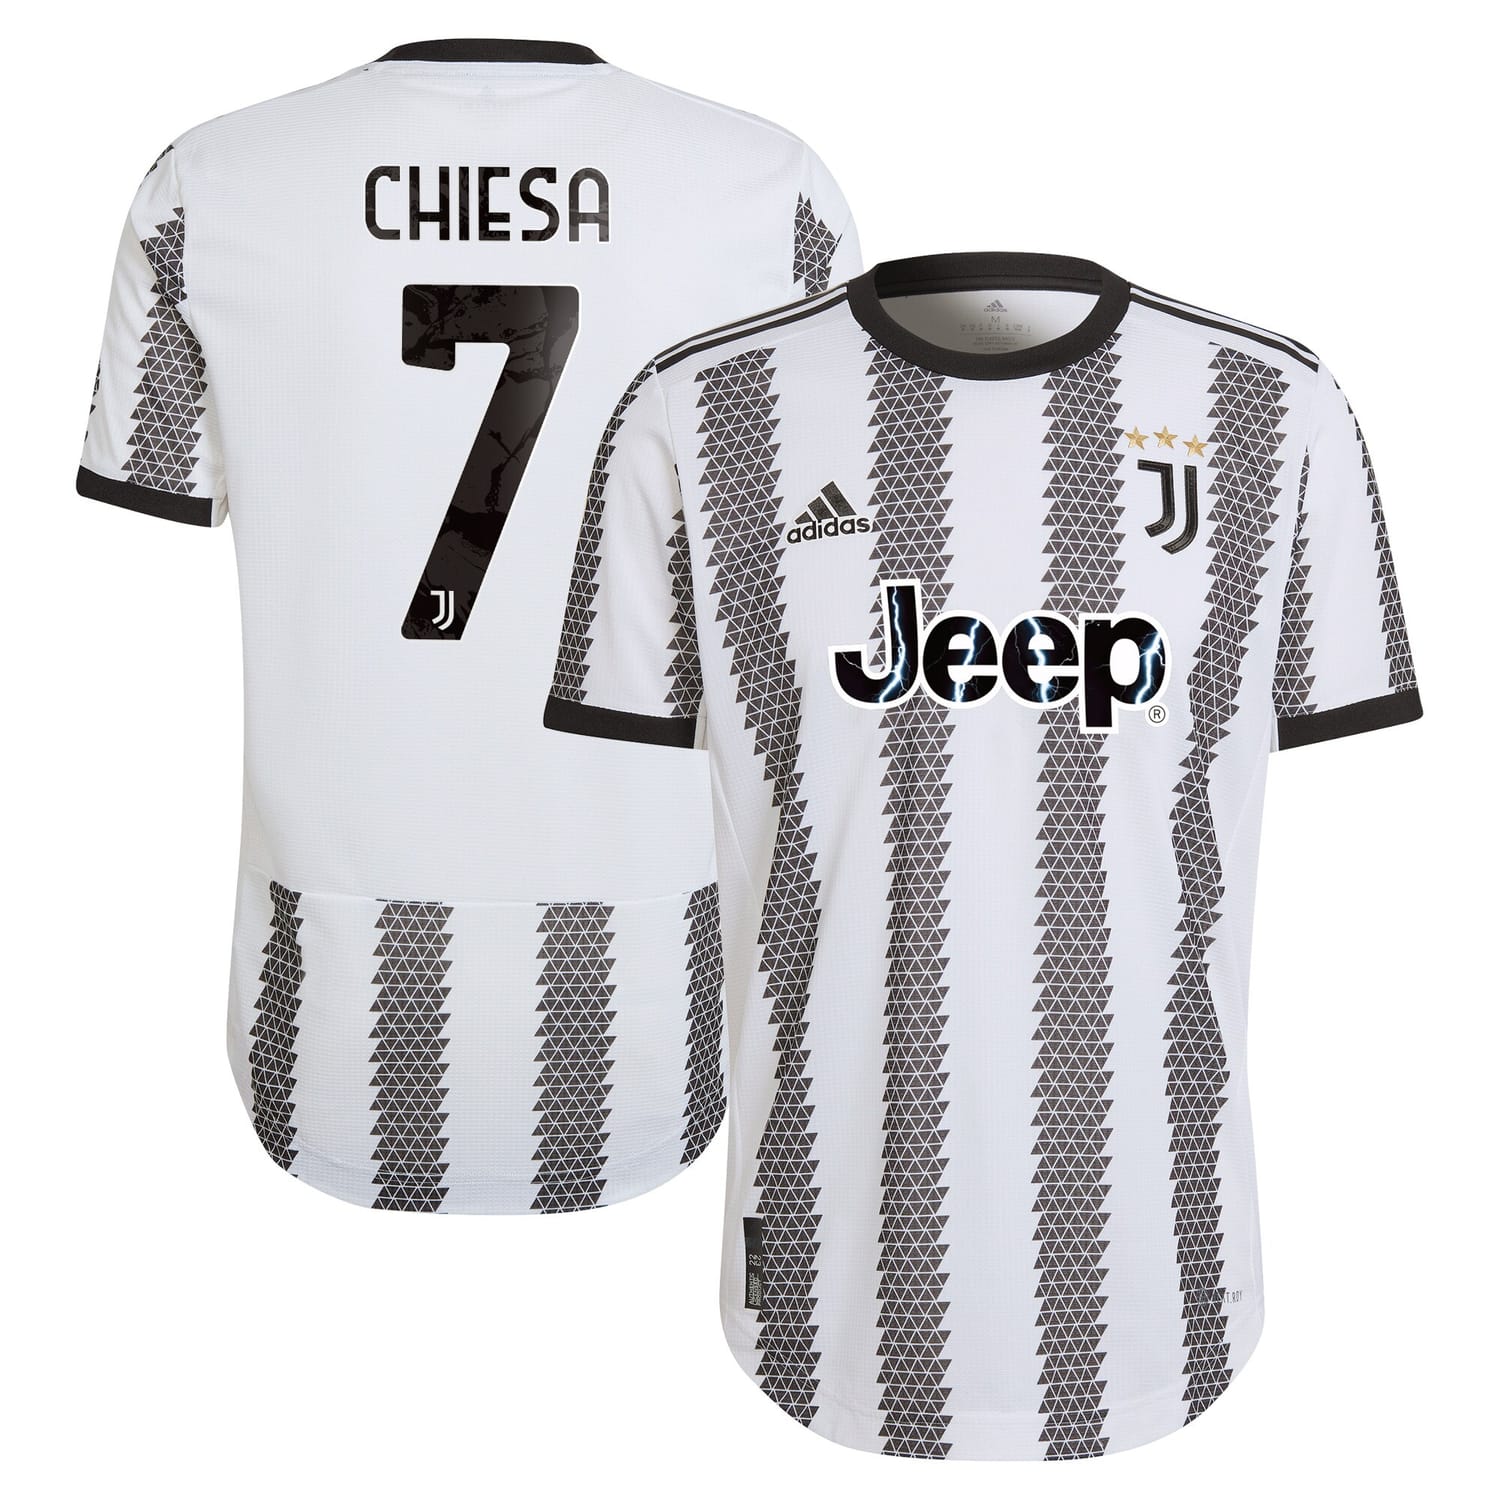 Serie A Juventus Home Authentic Jersey Shirt 2022-23 player Federico Chiesa 7 printing for Men